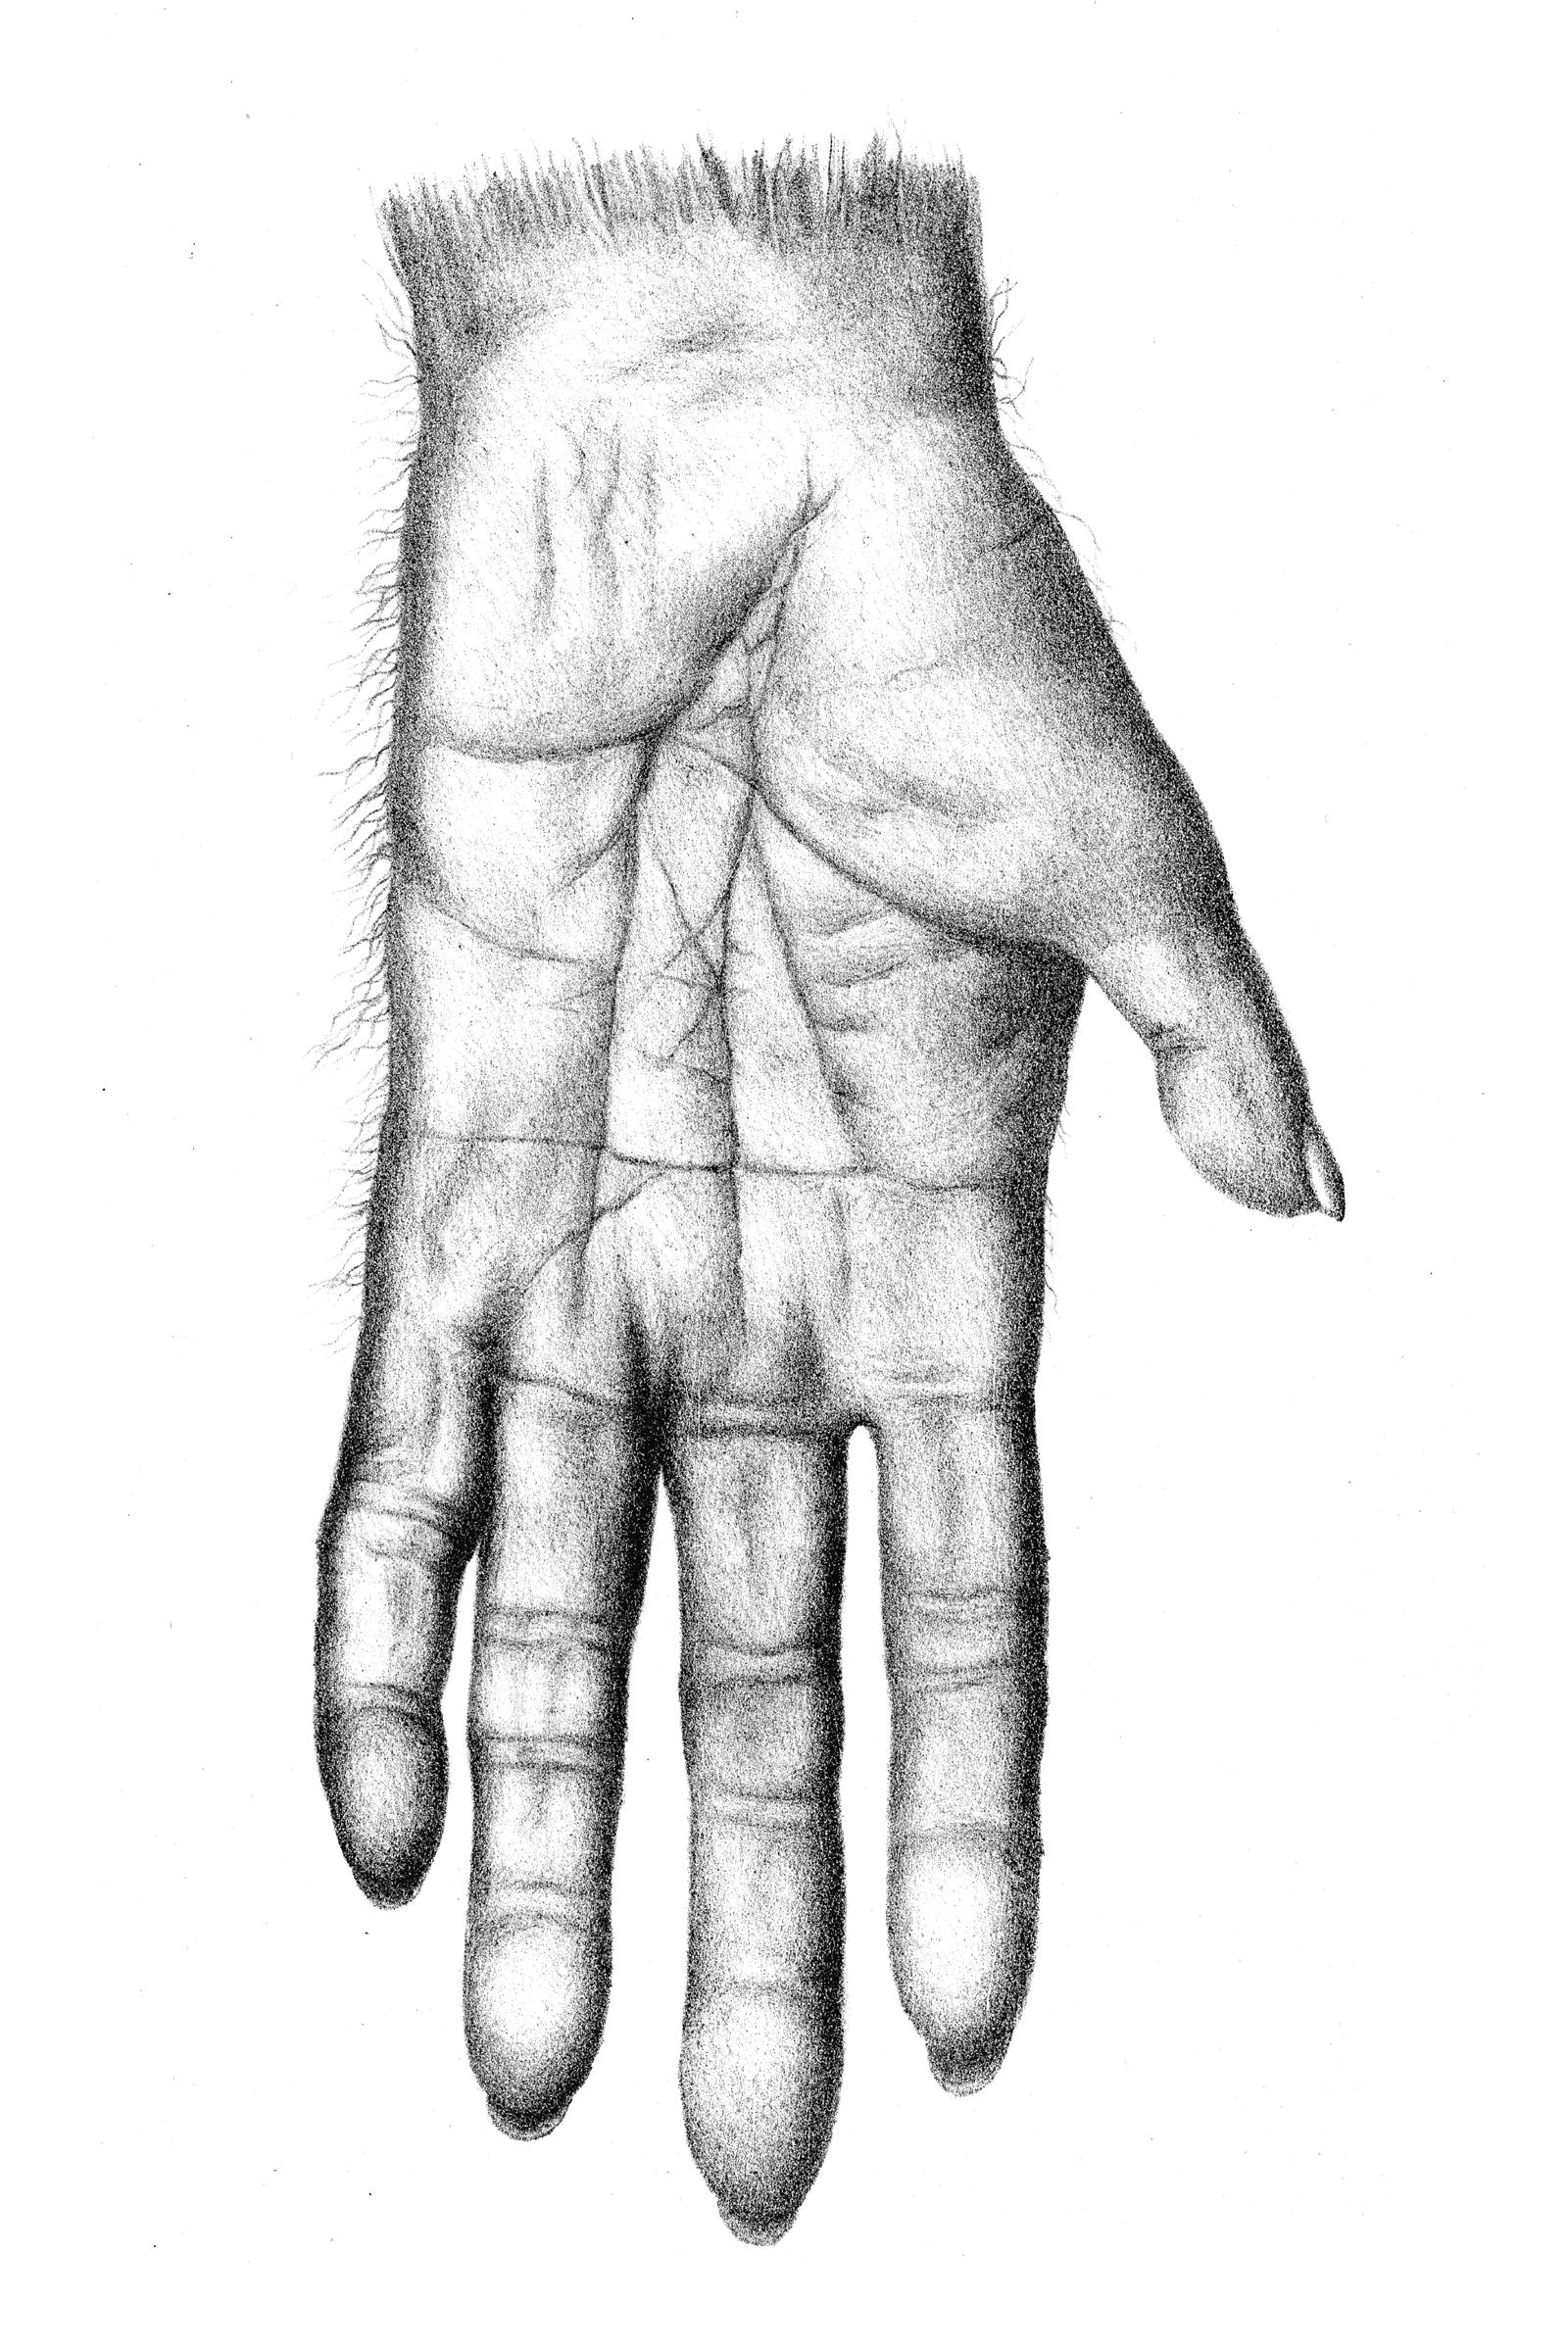 chimpanzee hand from above